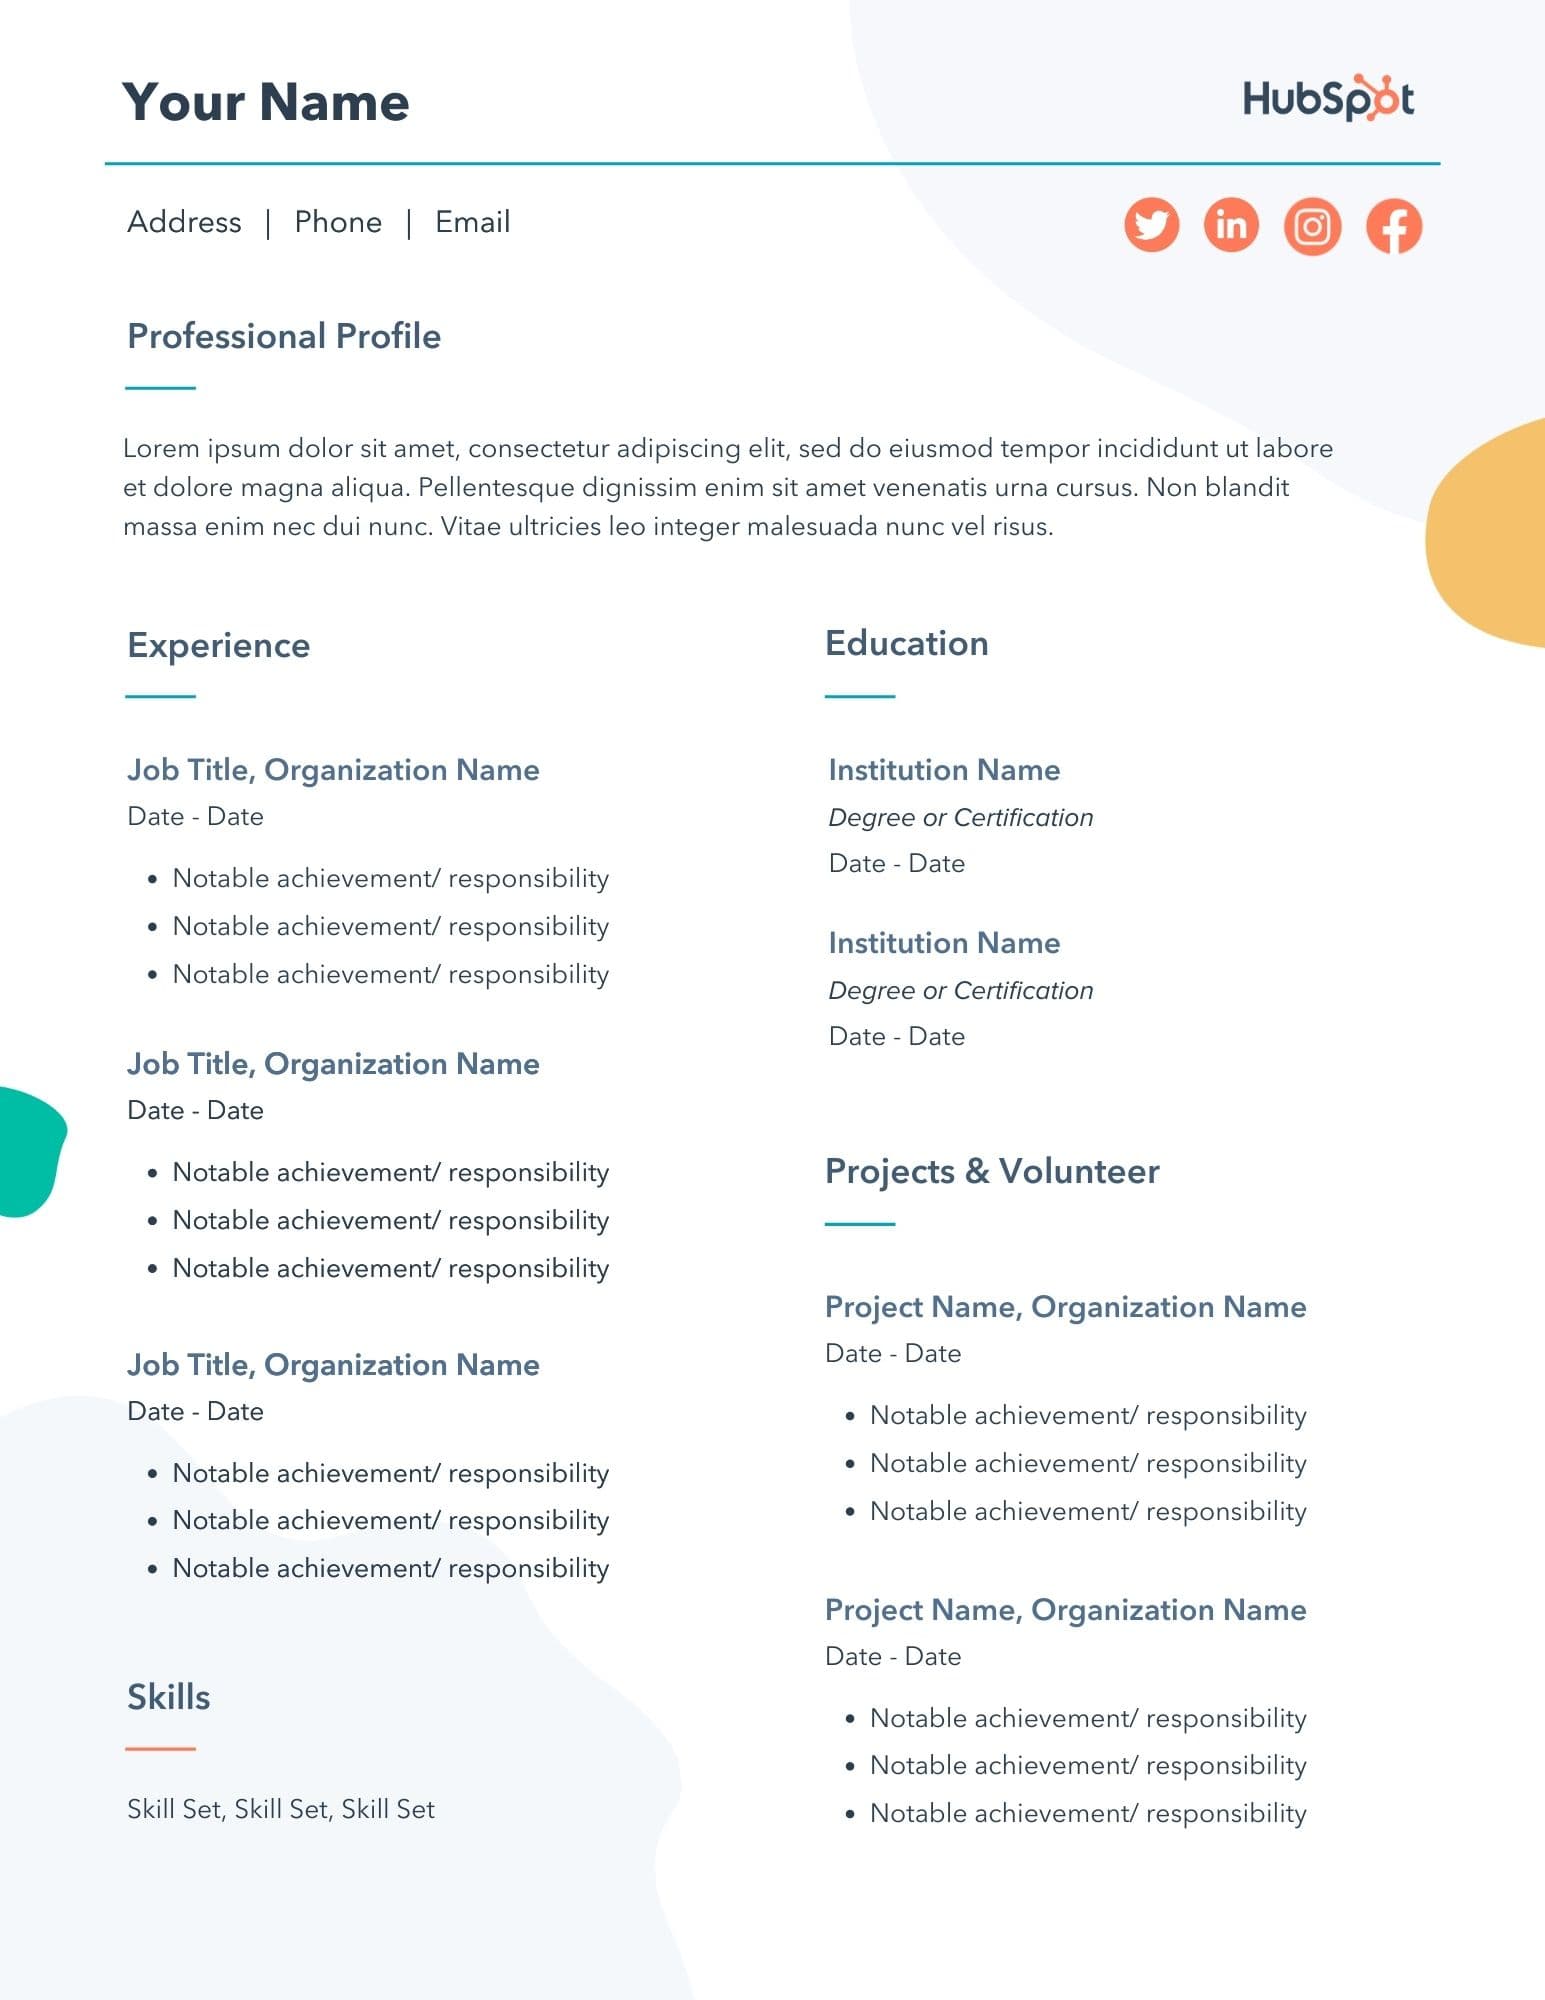 resume - What To Do When Rejected